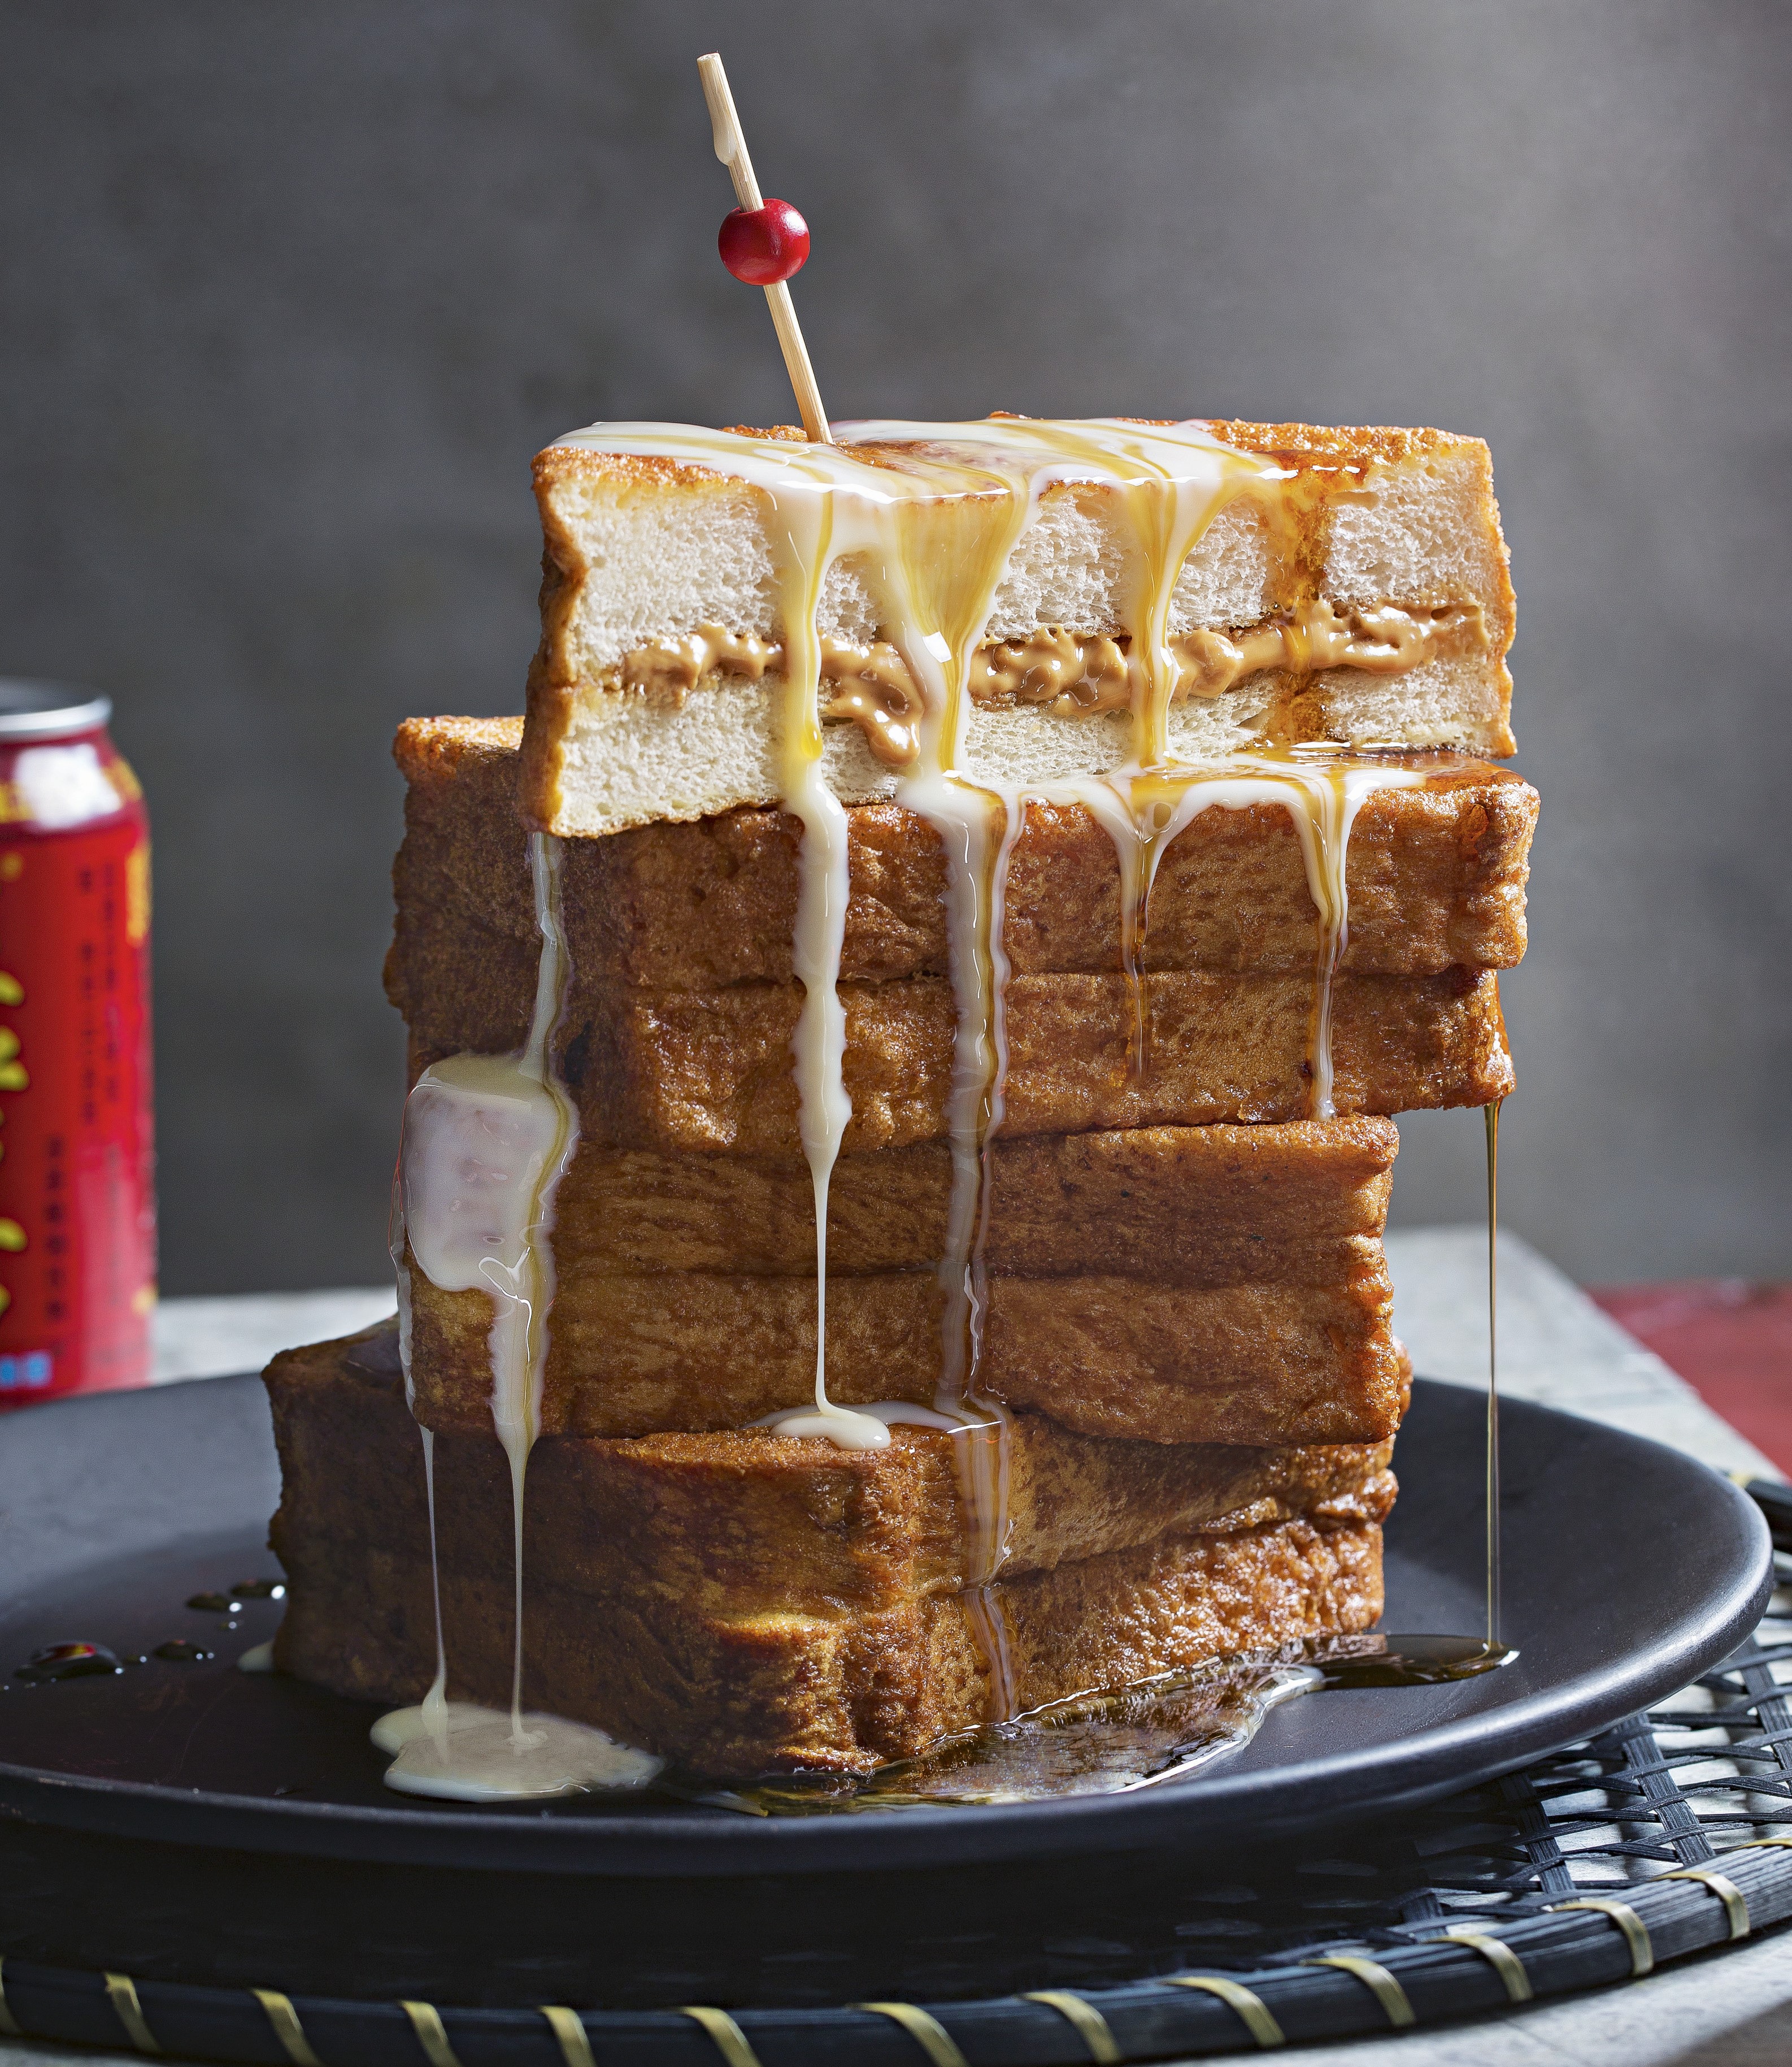 Hong Kong-style French toast